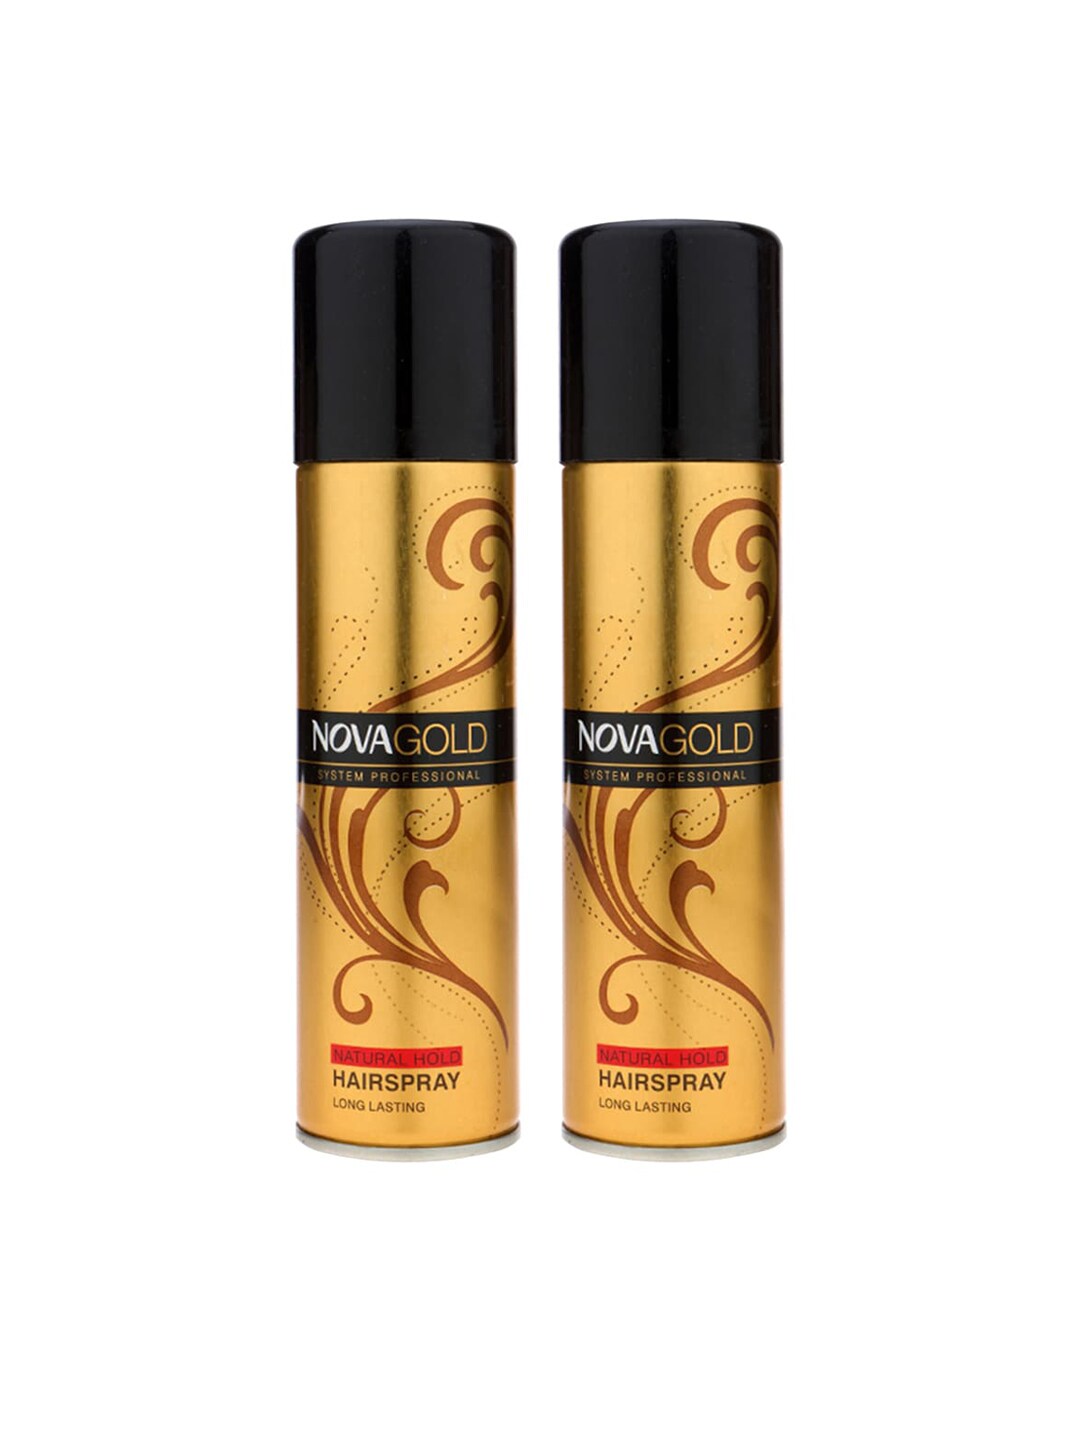 Nova Gold Natural Hold Hair Spray 200ml Pack of 2 Price in India